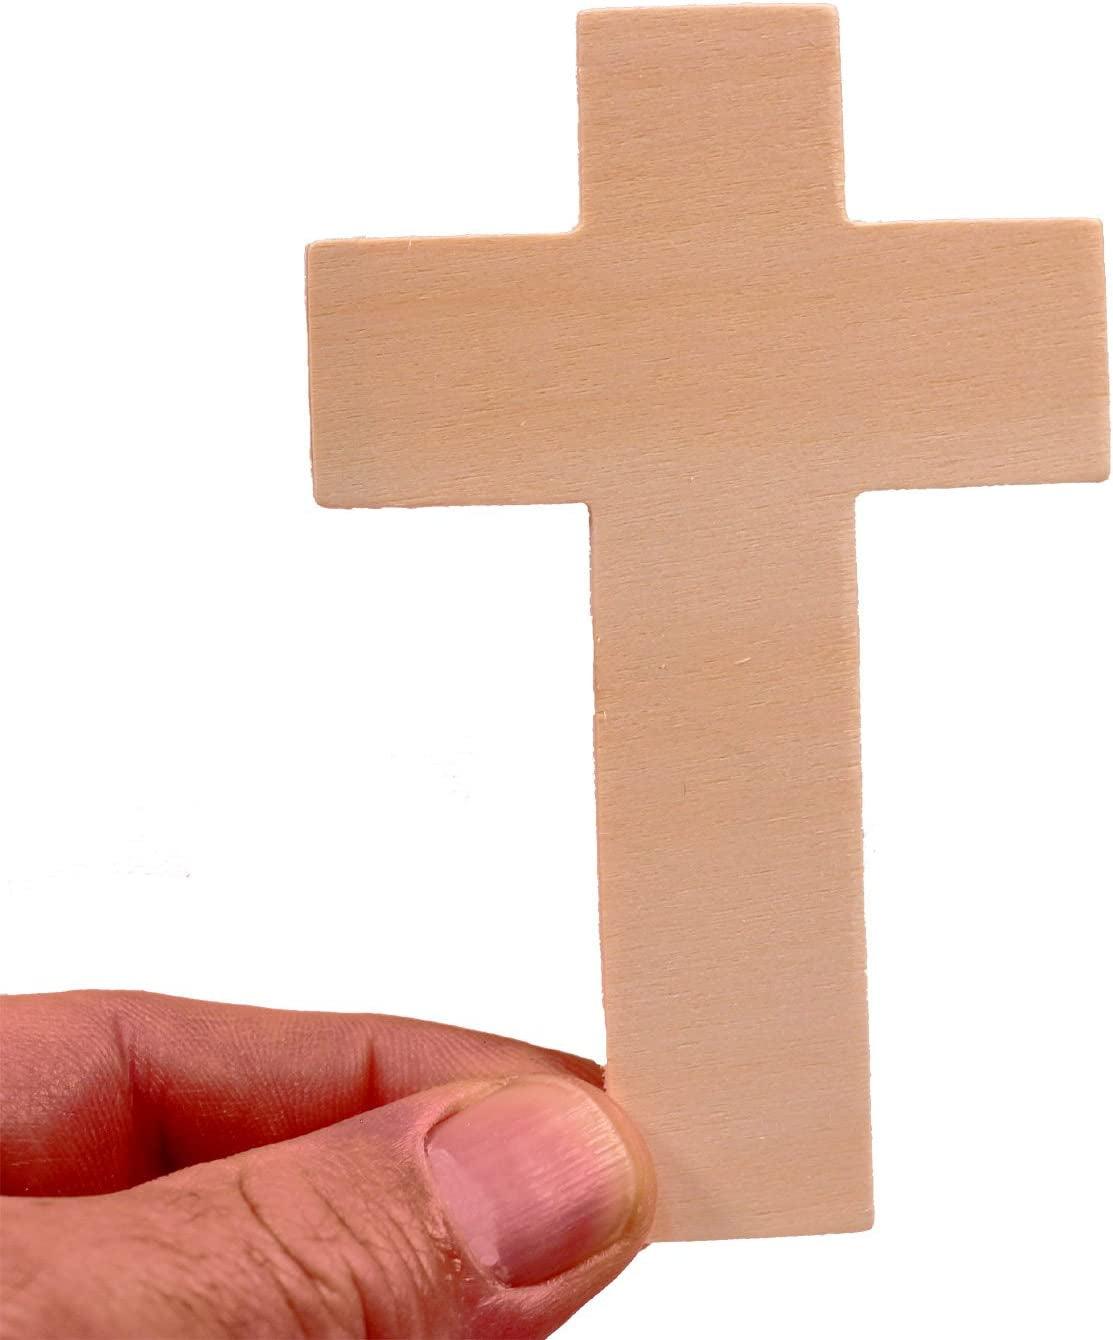 4.25 Inch High Unfinished Wooden Cross Shapes, Pack of 25, Ready to Paint or Decorate - WoodArtSupply